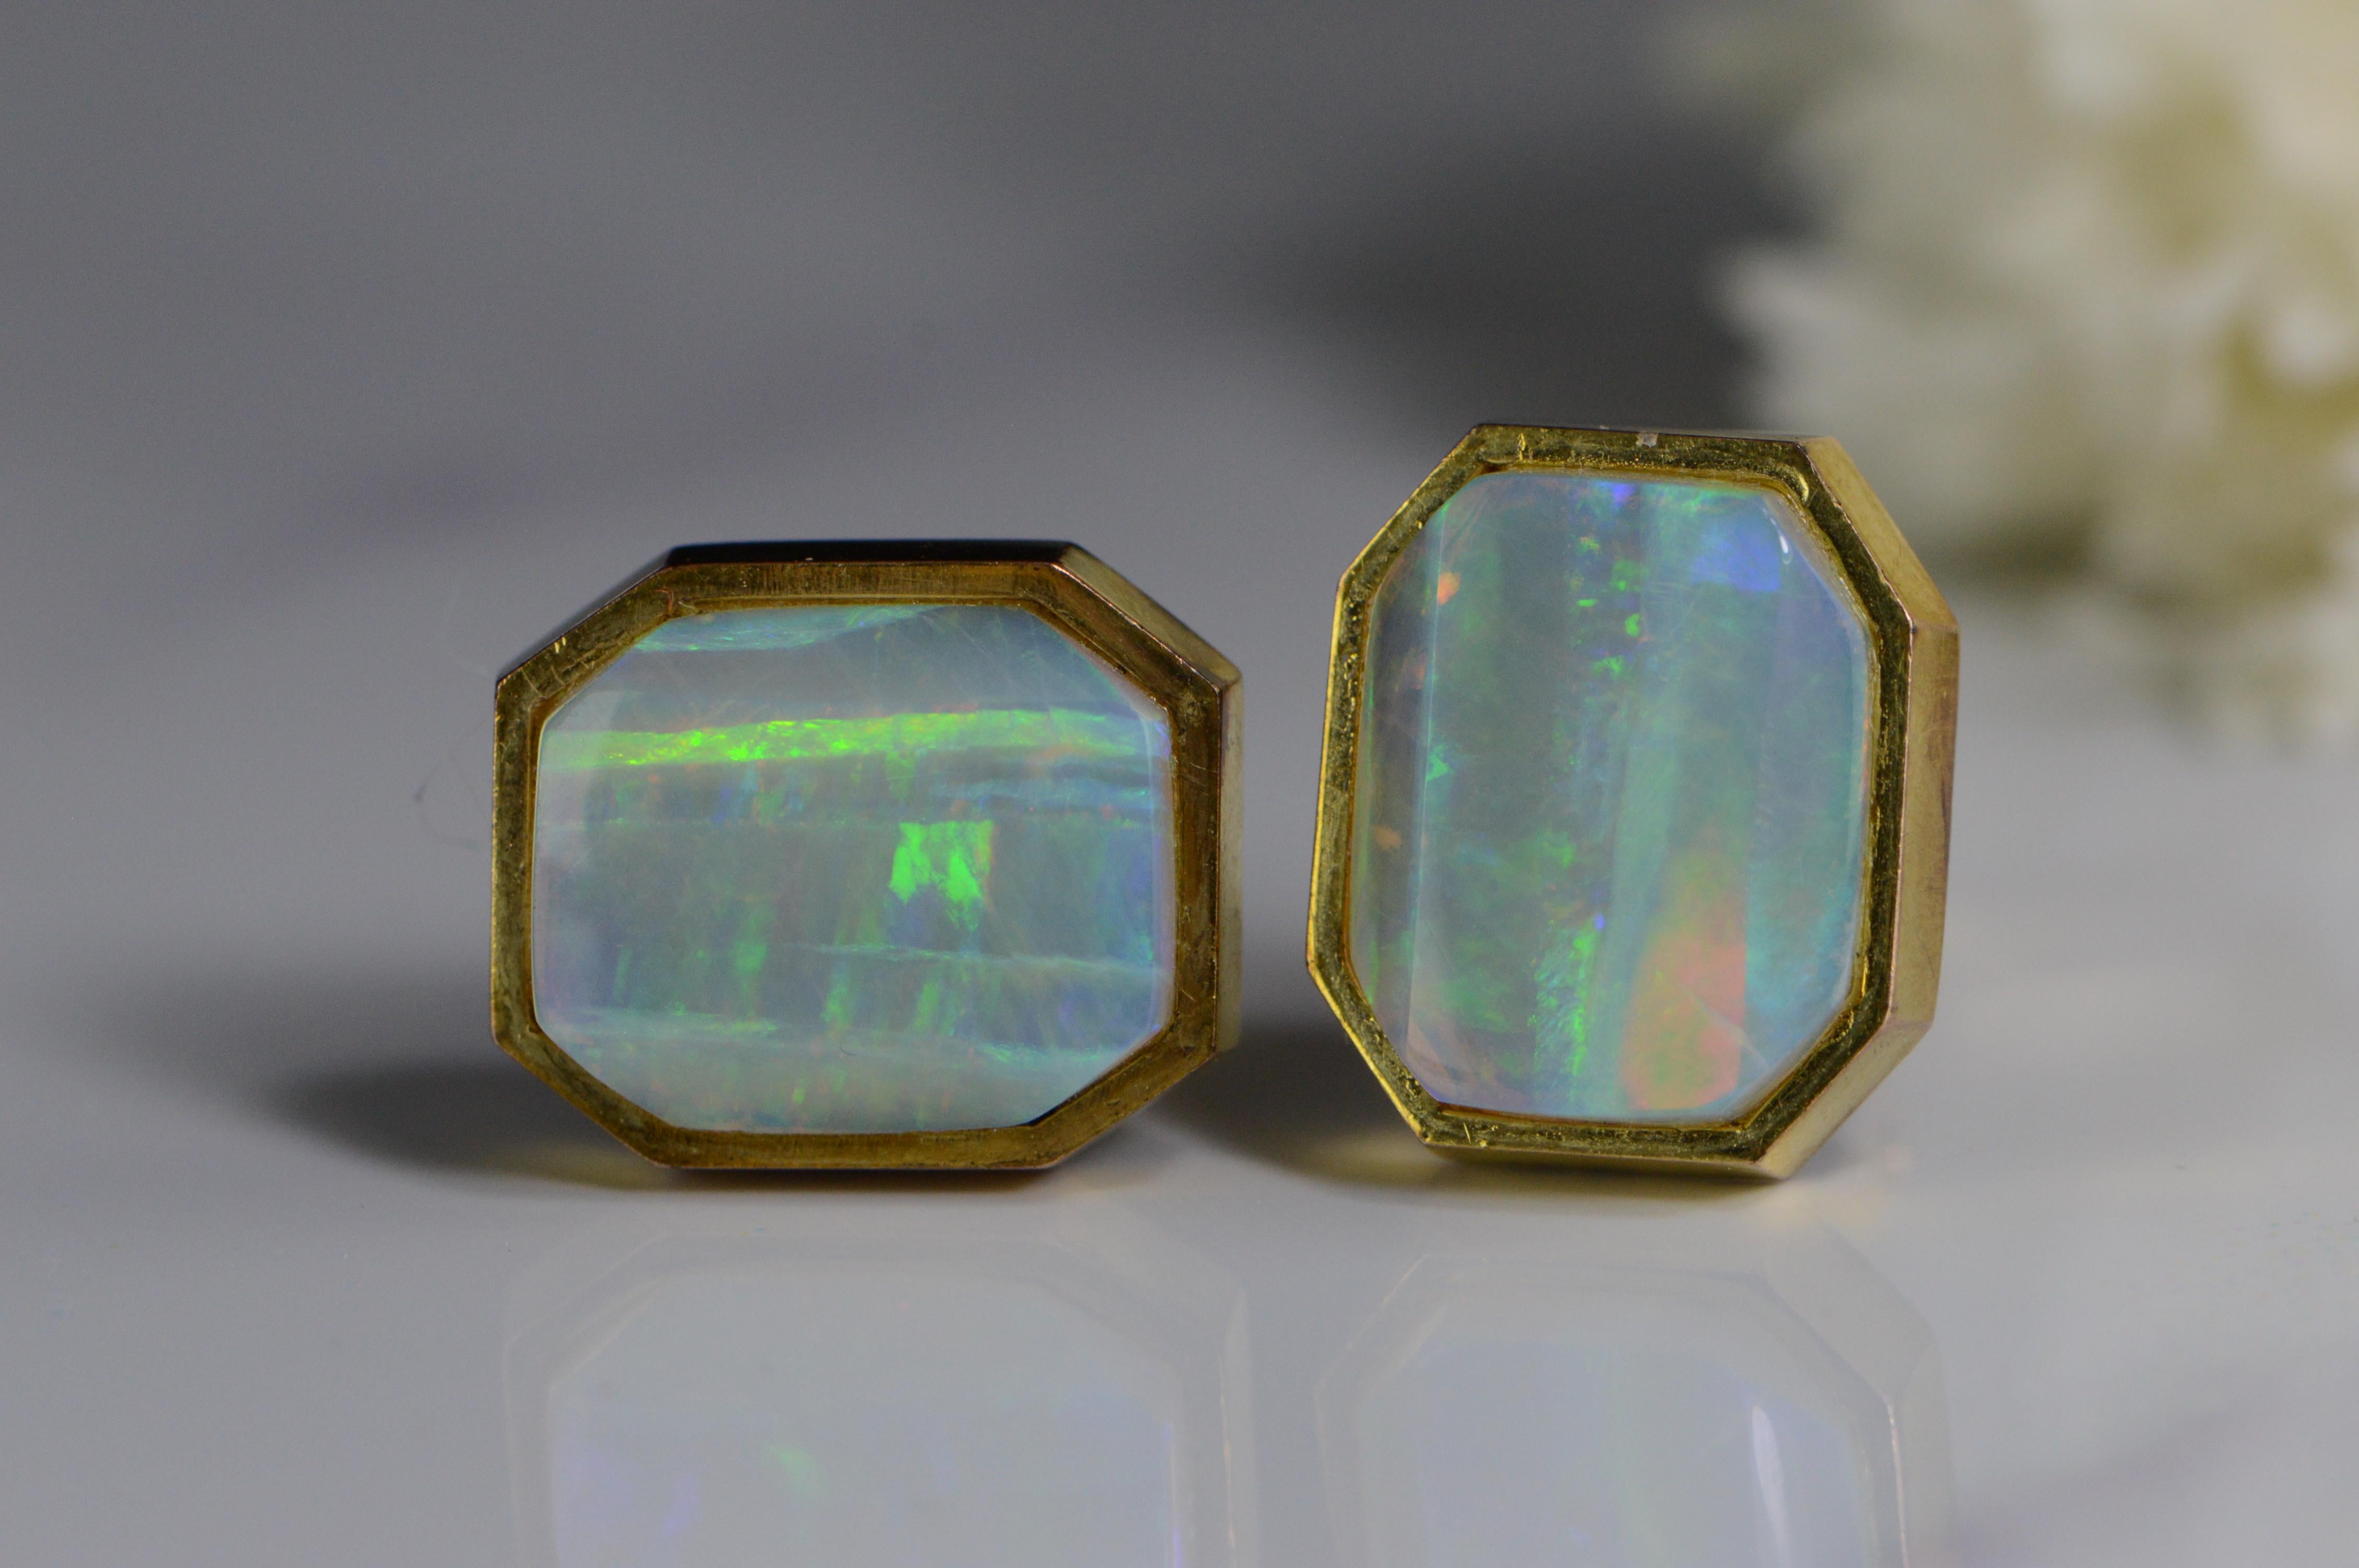  ·Item: 14K Stunning 15x12mm Opal Inset Cuff Links Yellow Gold  
·Era: Vintage / 1960s  
·Composition: 14k Gold Marked / Tested  
·Condition: Estate: Good  
·Weight: 13.2g